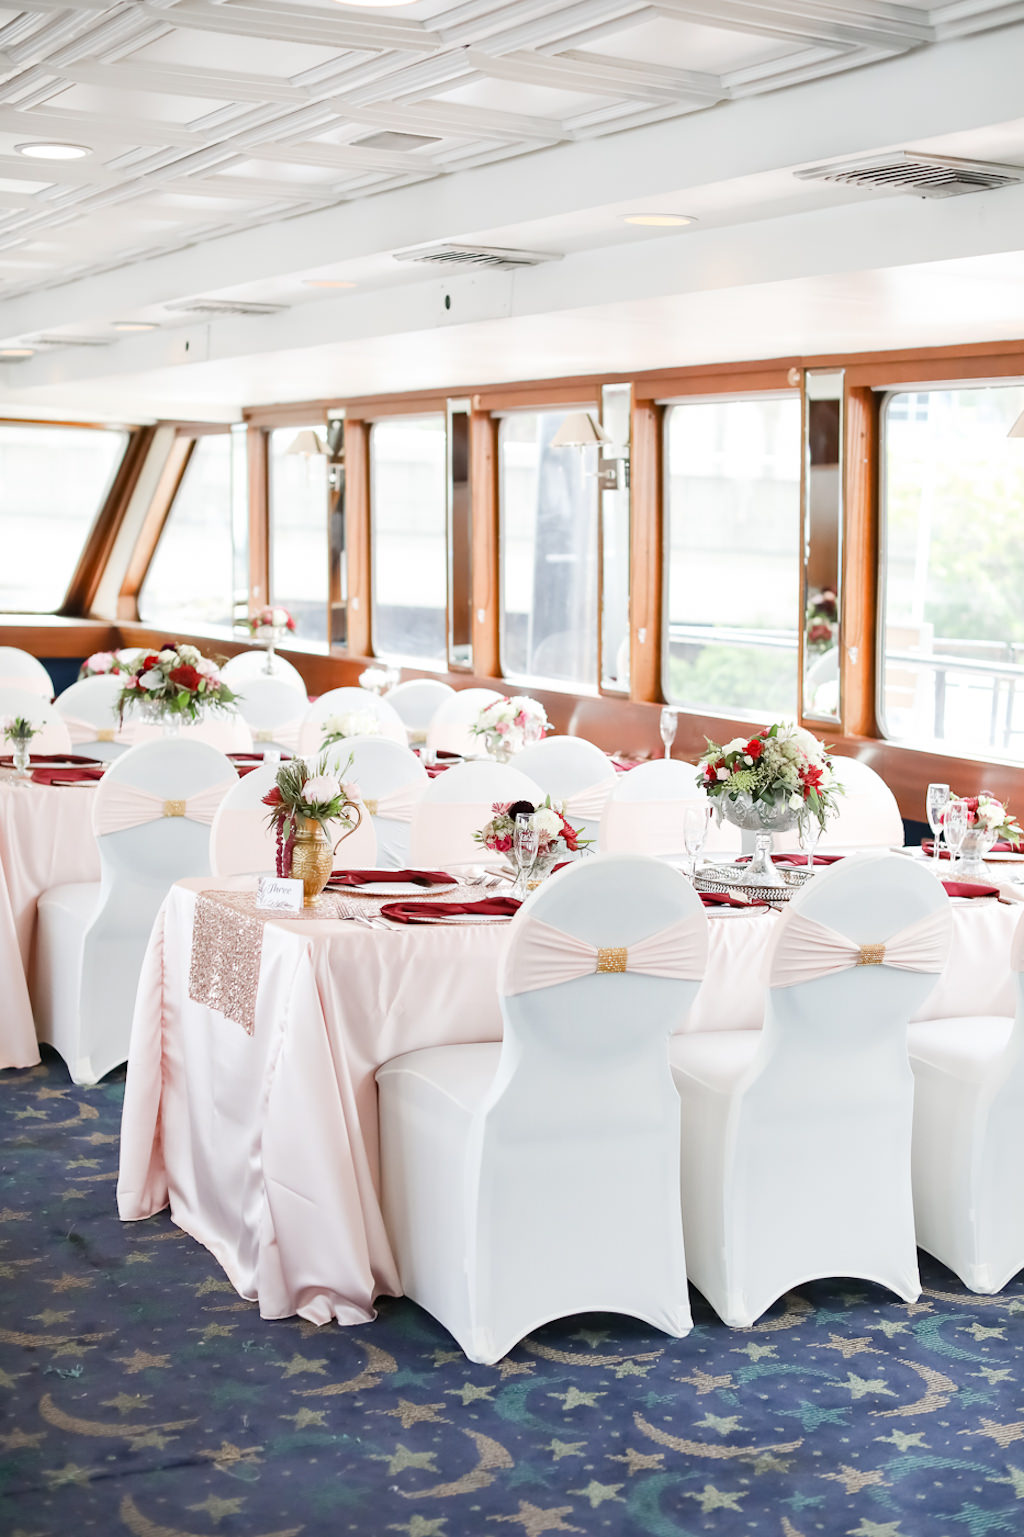 Classic Elegant Wedding Reception Decor, Long Tables with Blush Pink Silk Linens, White Linen Covered Chairs with Blush Pink Sash, Low Floral Centerpieces | Tampa Bay Wedding Photographer Lifelong Photography Studio | Clearwater Waterfront Wedding Venue Yacht Starship | Wedding Rentals Kate Ryan Event Rentals